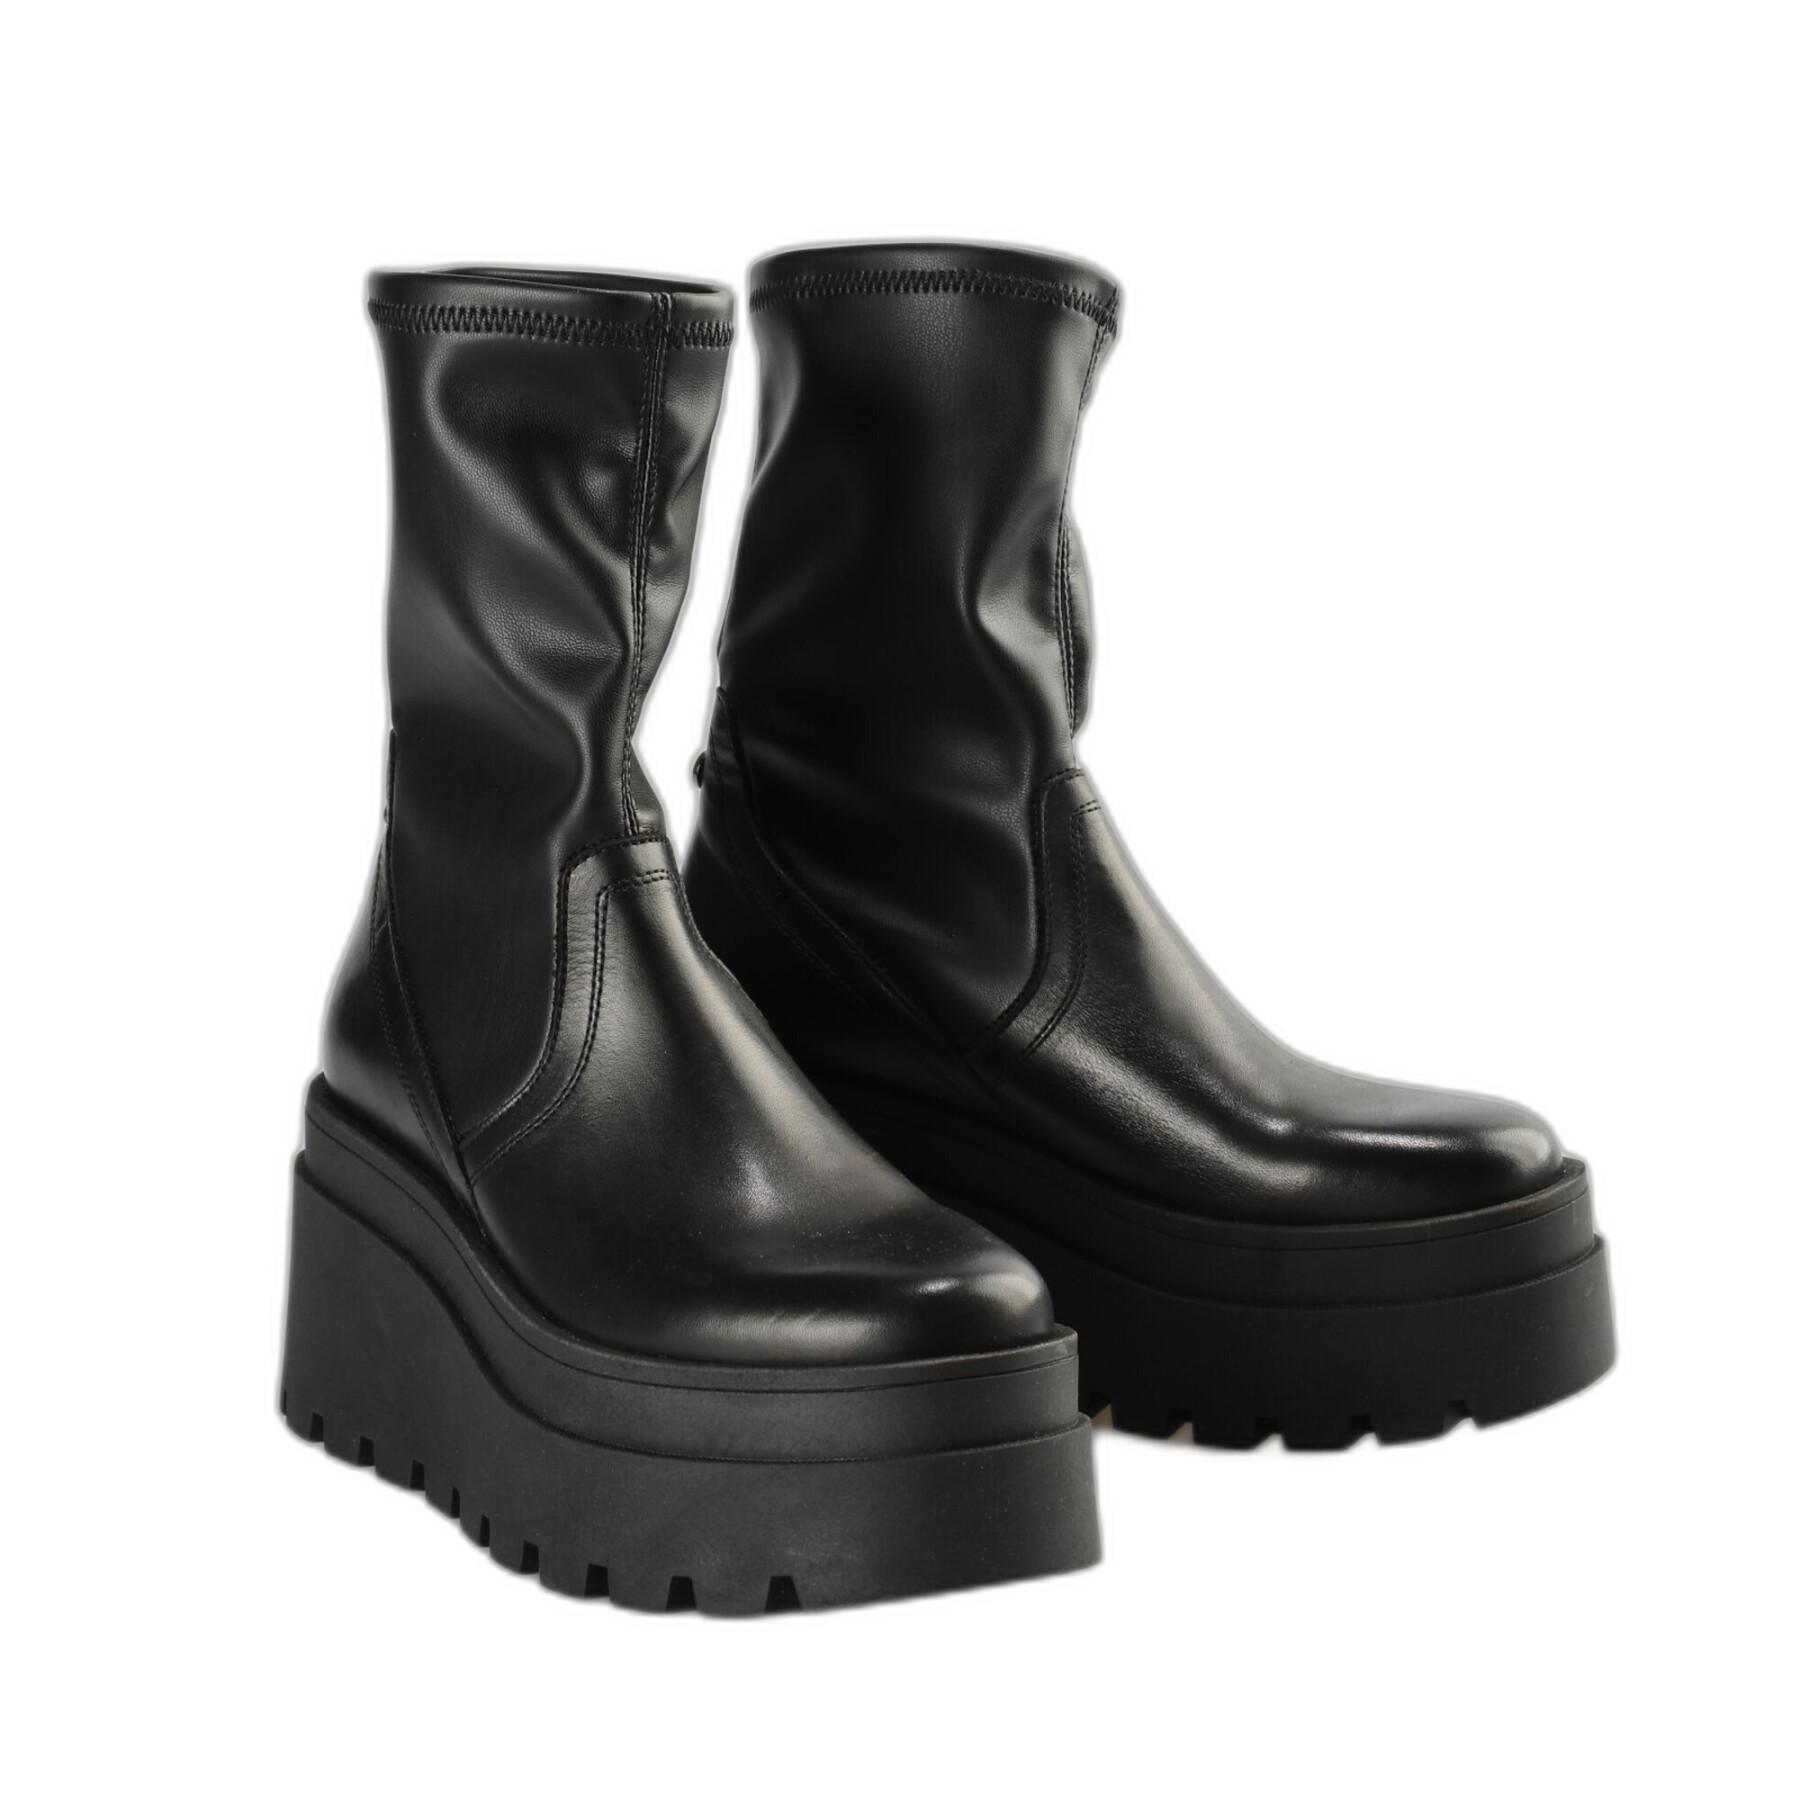 Patent leather boots for women Buffalo Lift Mid